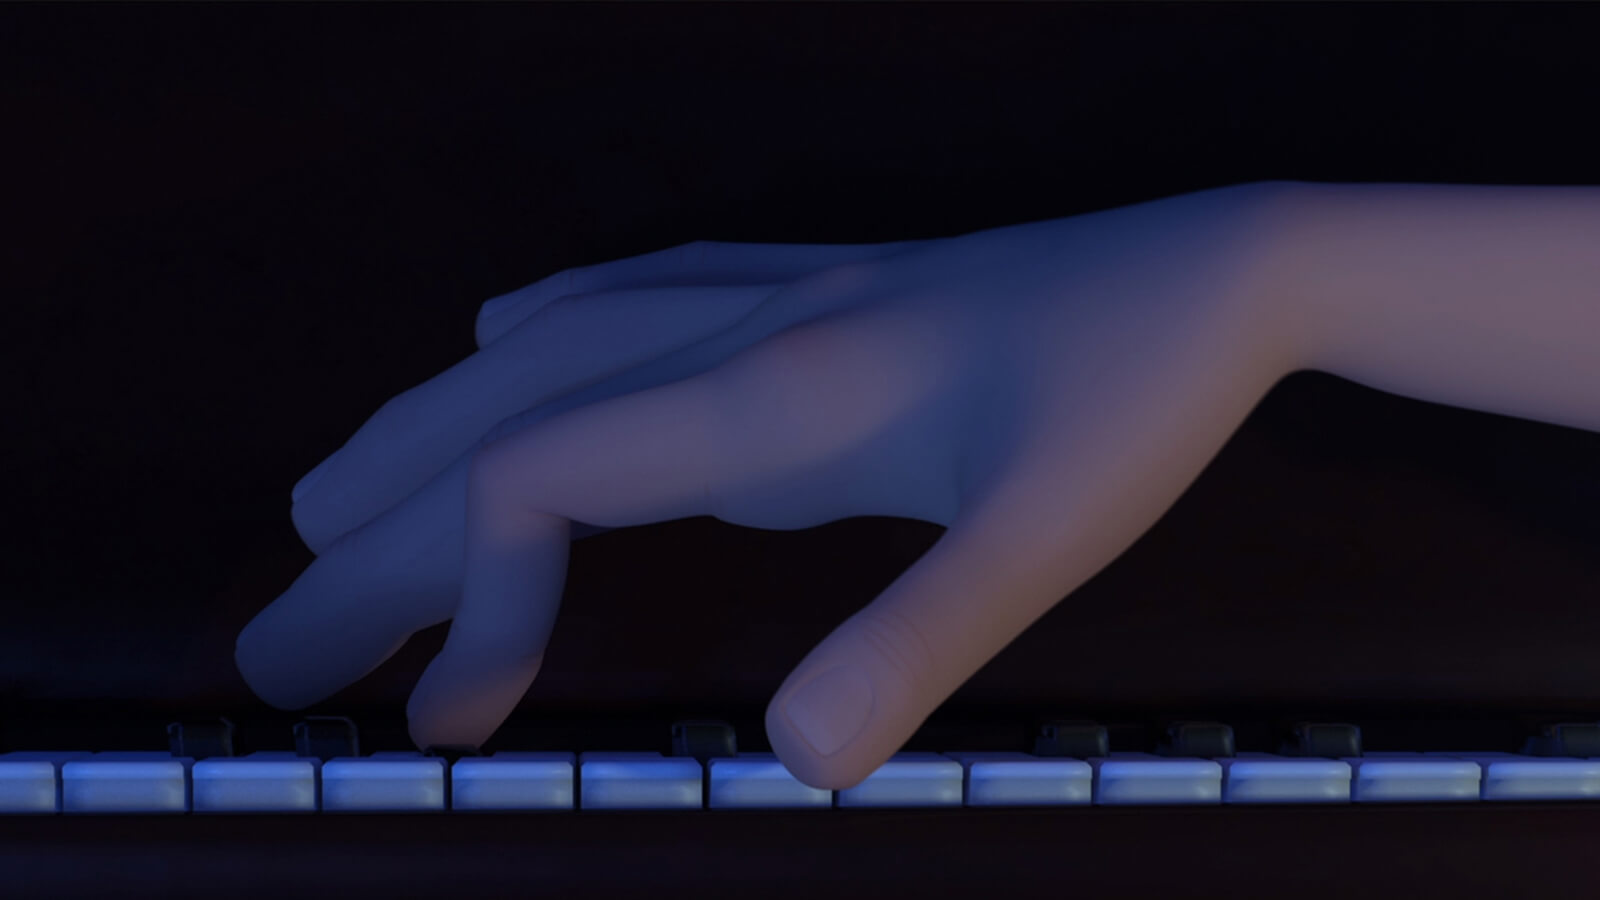 Extreme close up of a hand hovering over a piano keyboard in a dimly lit room